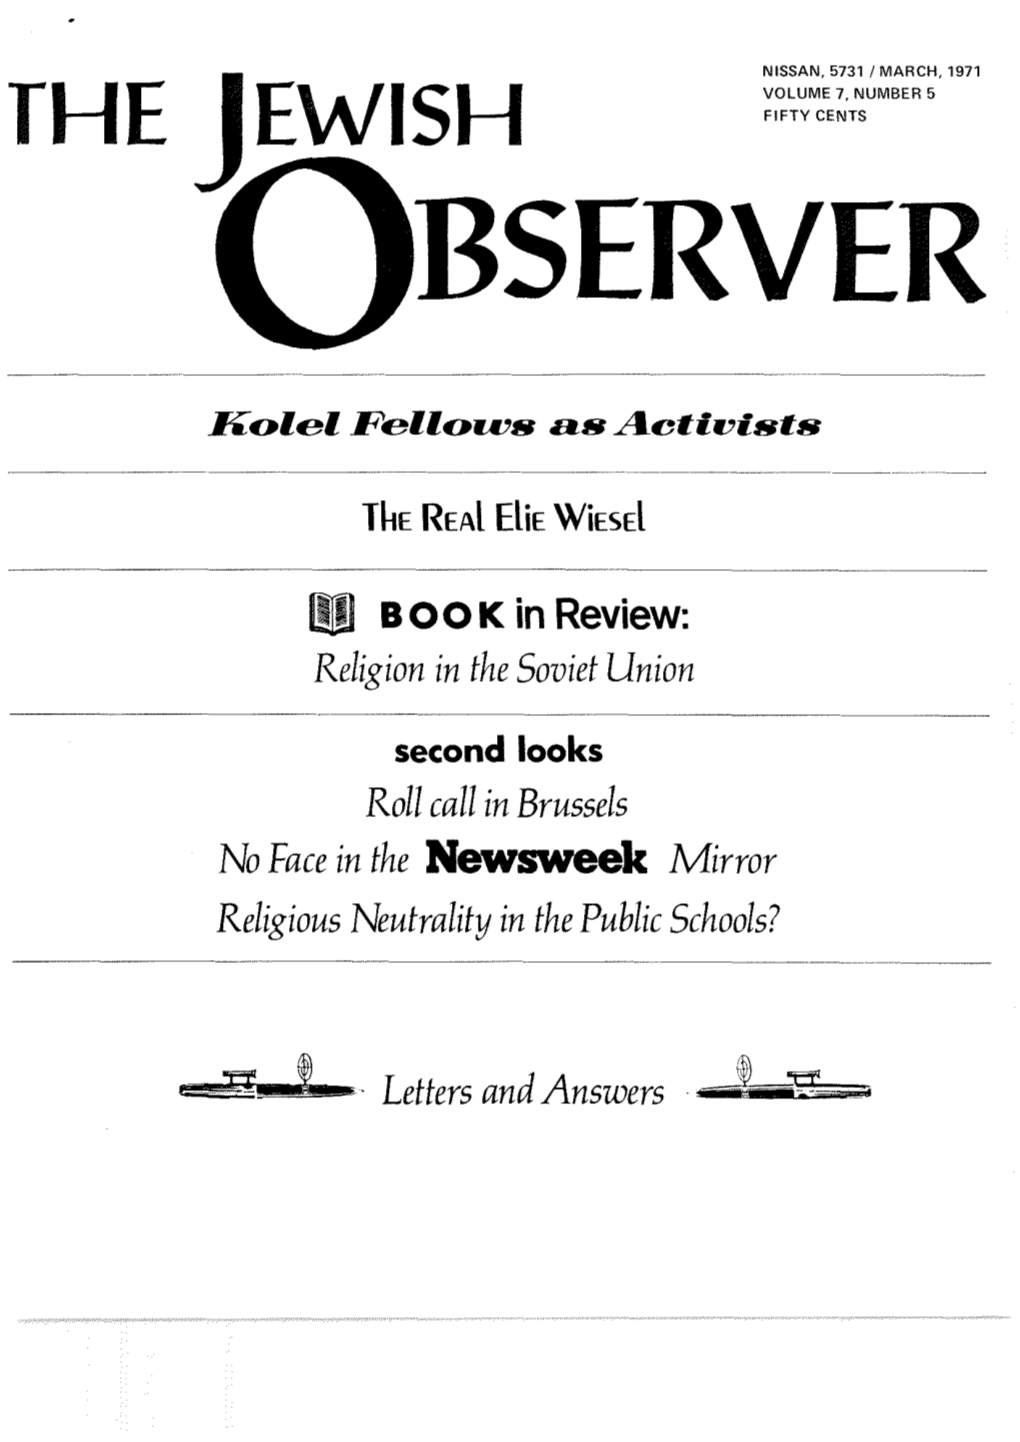 Iii a Oo K in Review: Religion in the Soviet Union